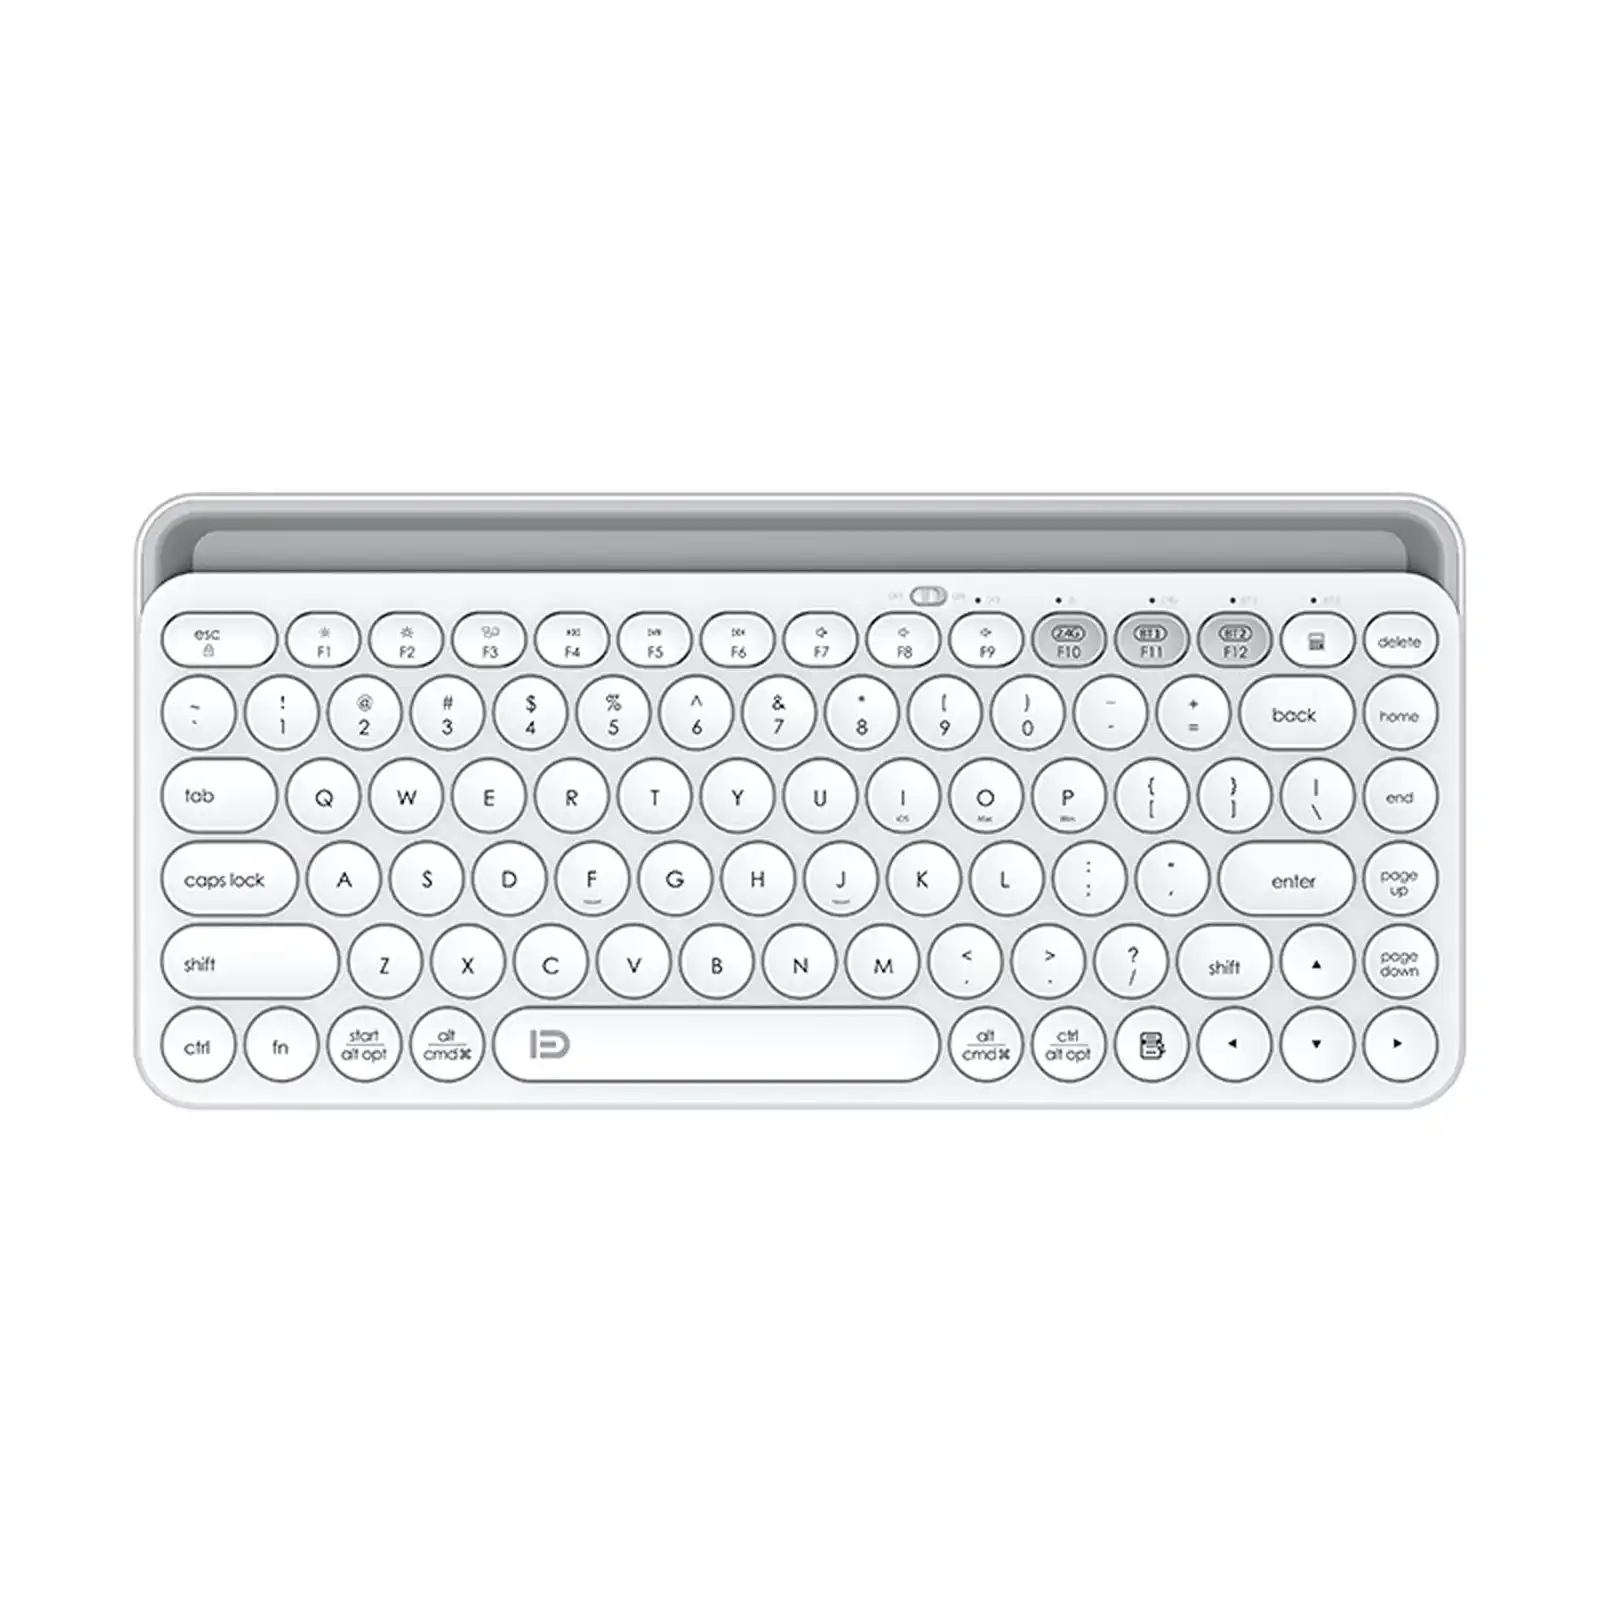 TODO Bluetooth Wireless Keyboard Tablet Holder Mac Windows Android 2.4G USB DUAL BT 3.0 5.0 - White